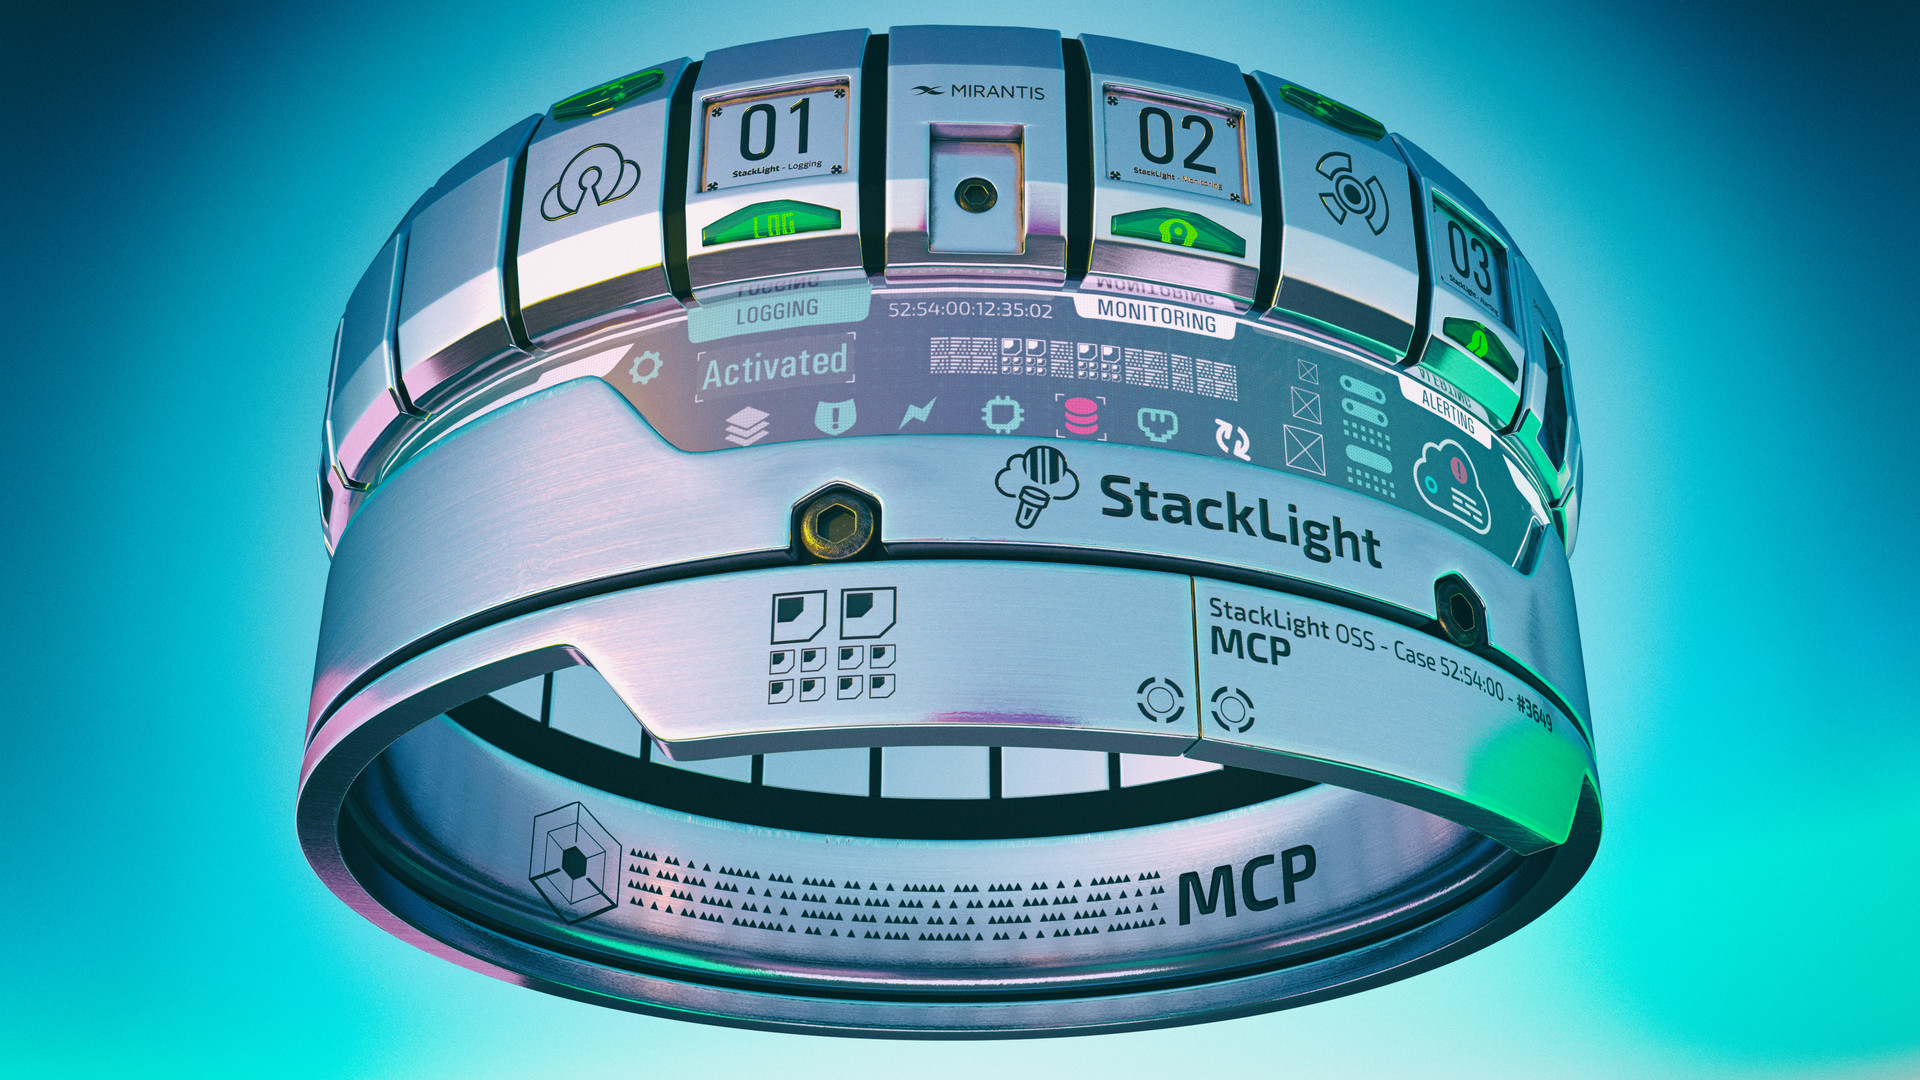 Andrew Gasanoff - Futuristic watch, Cloud Software Lifecycle Management  product visual.